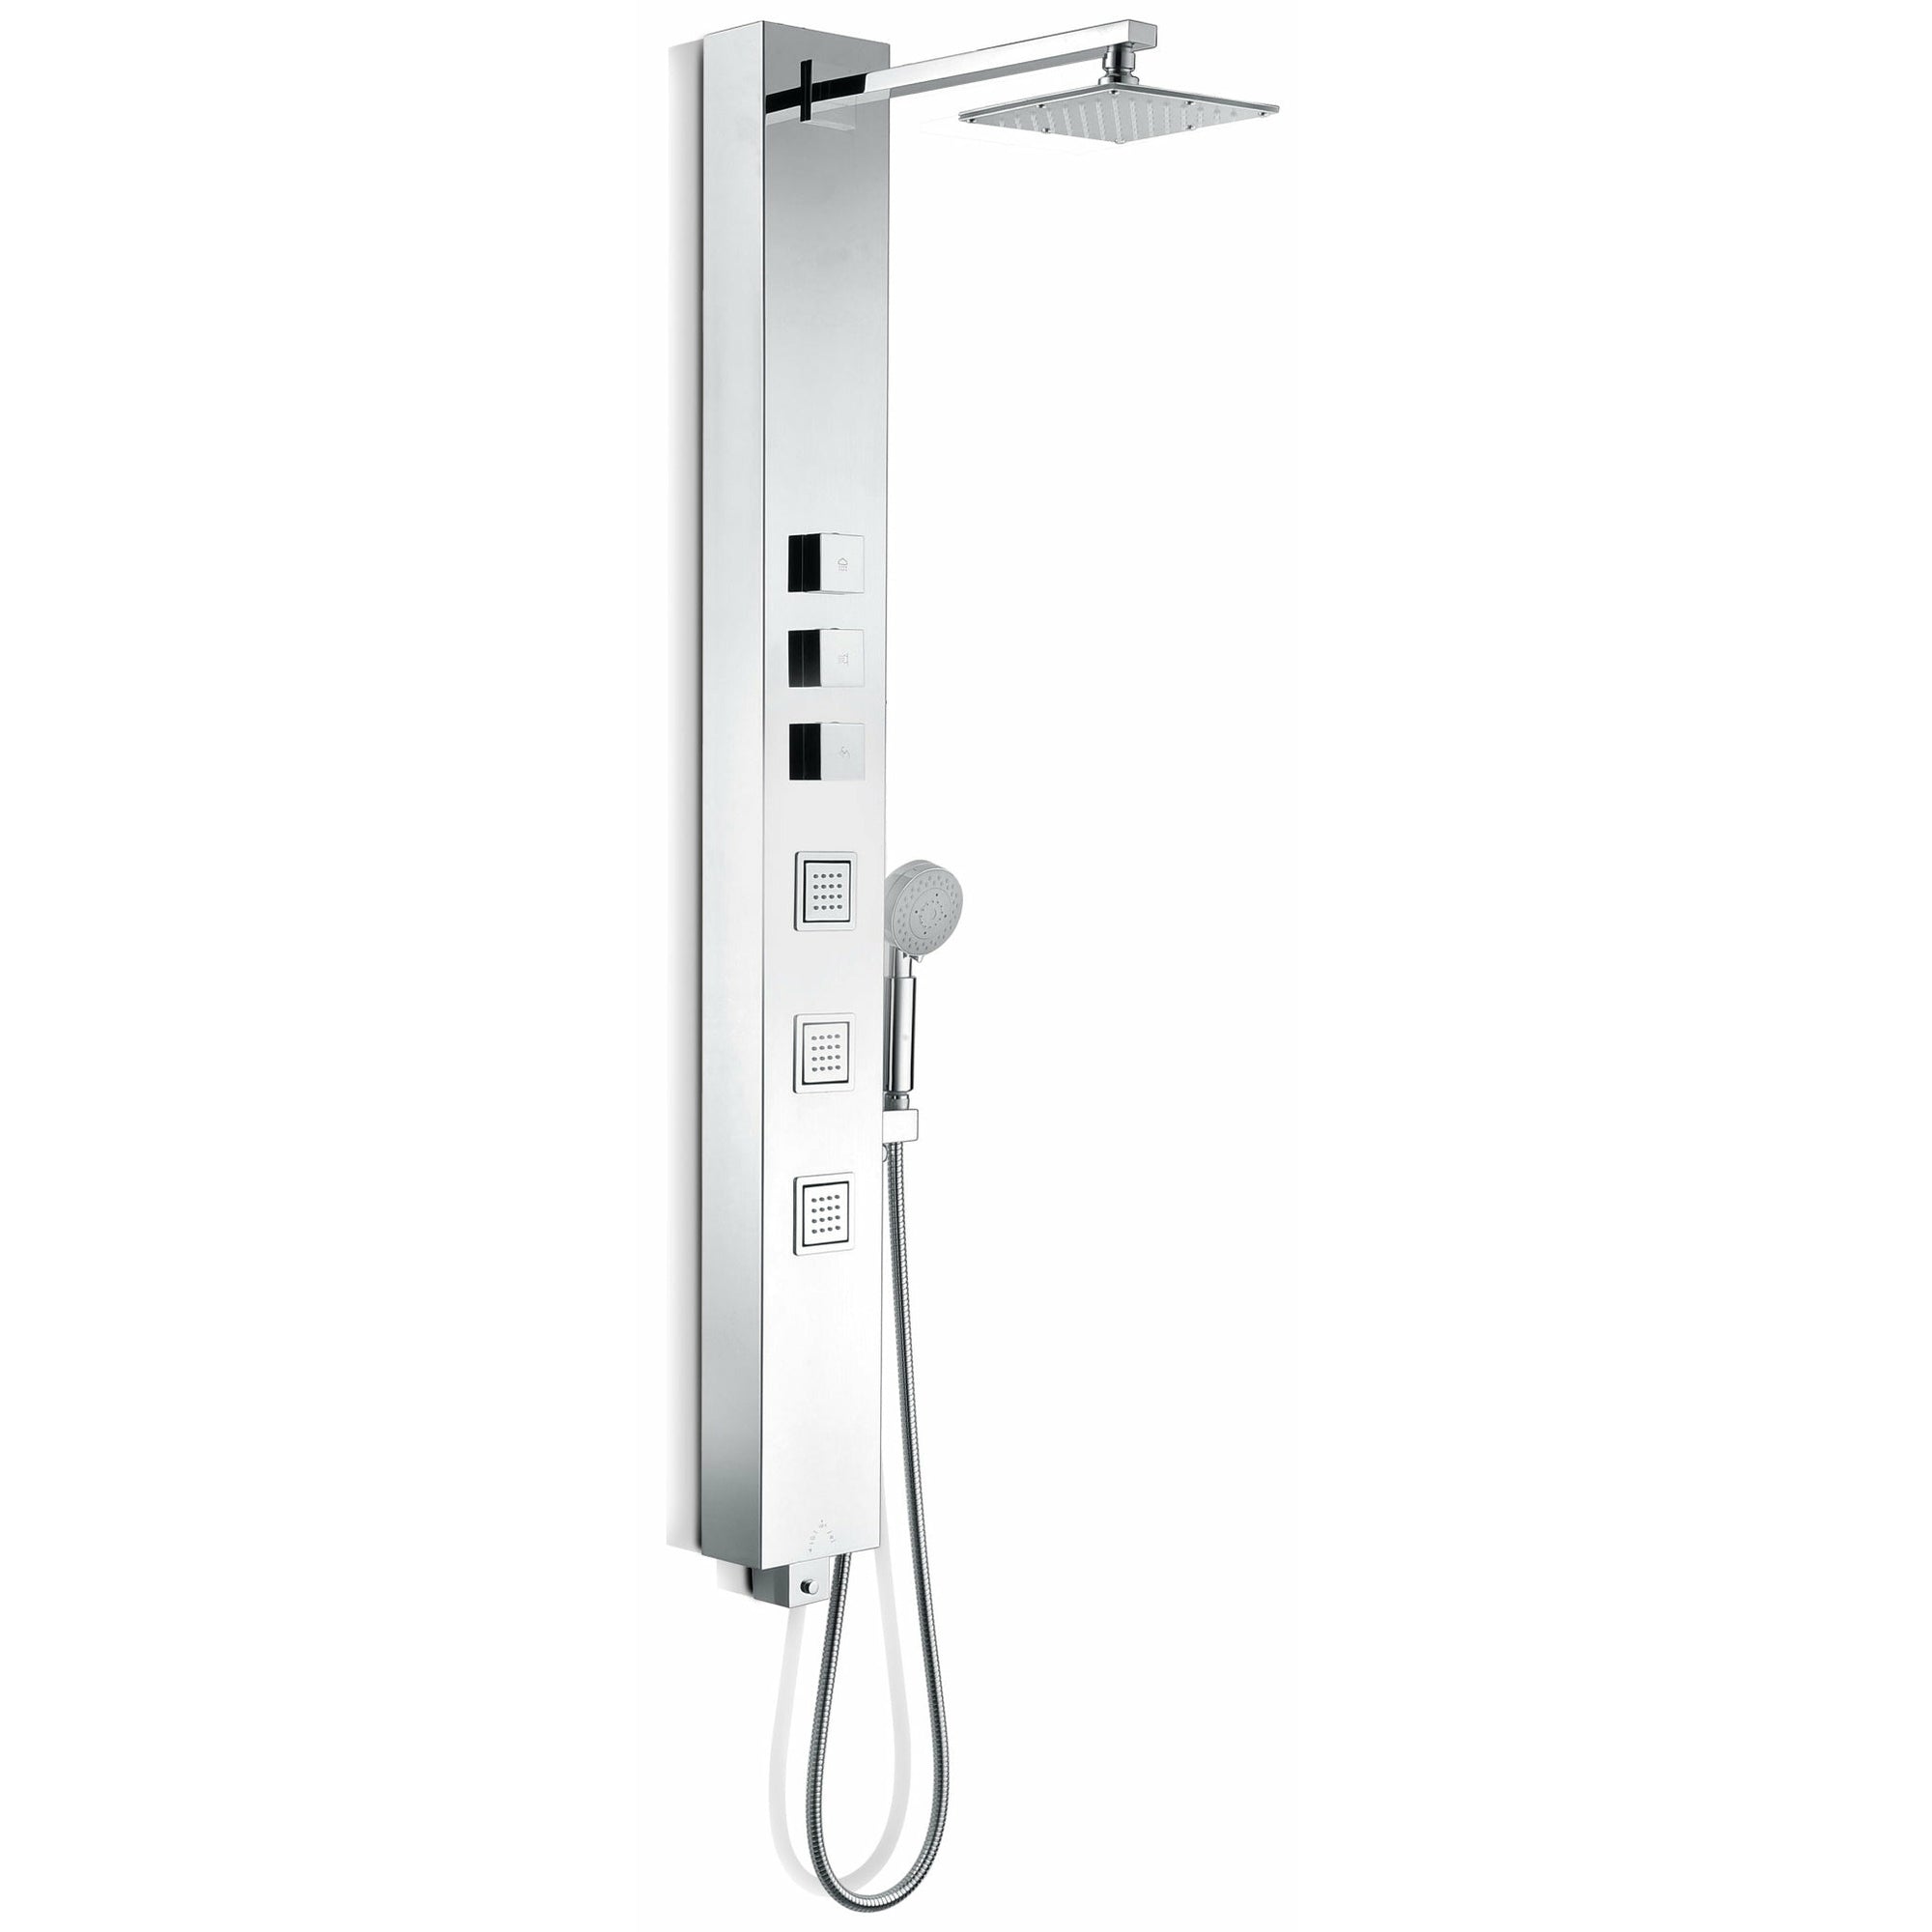 Anzzi Lann 53 Inches Full Body Shower Panel with Swiveling Heavy Rain Shower Head, Acu-stream Body Massage Jets, Shower Control Knobs and Euro-Grip Free Range Hand Sprayer in Chrome SP-AZ015 - Vital Hydrotherapy